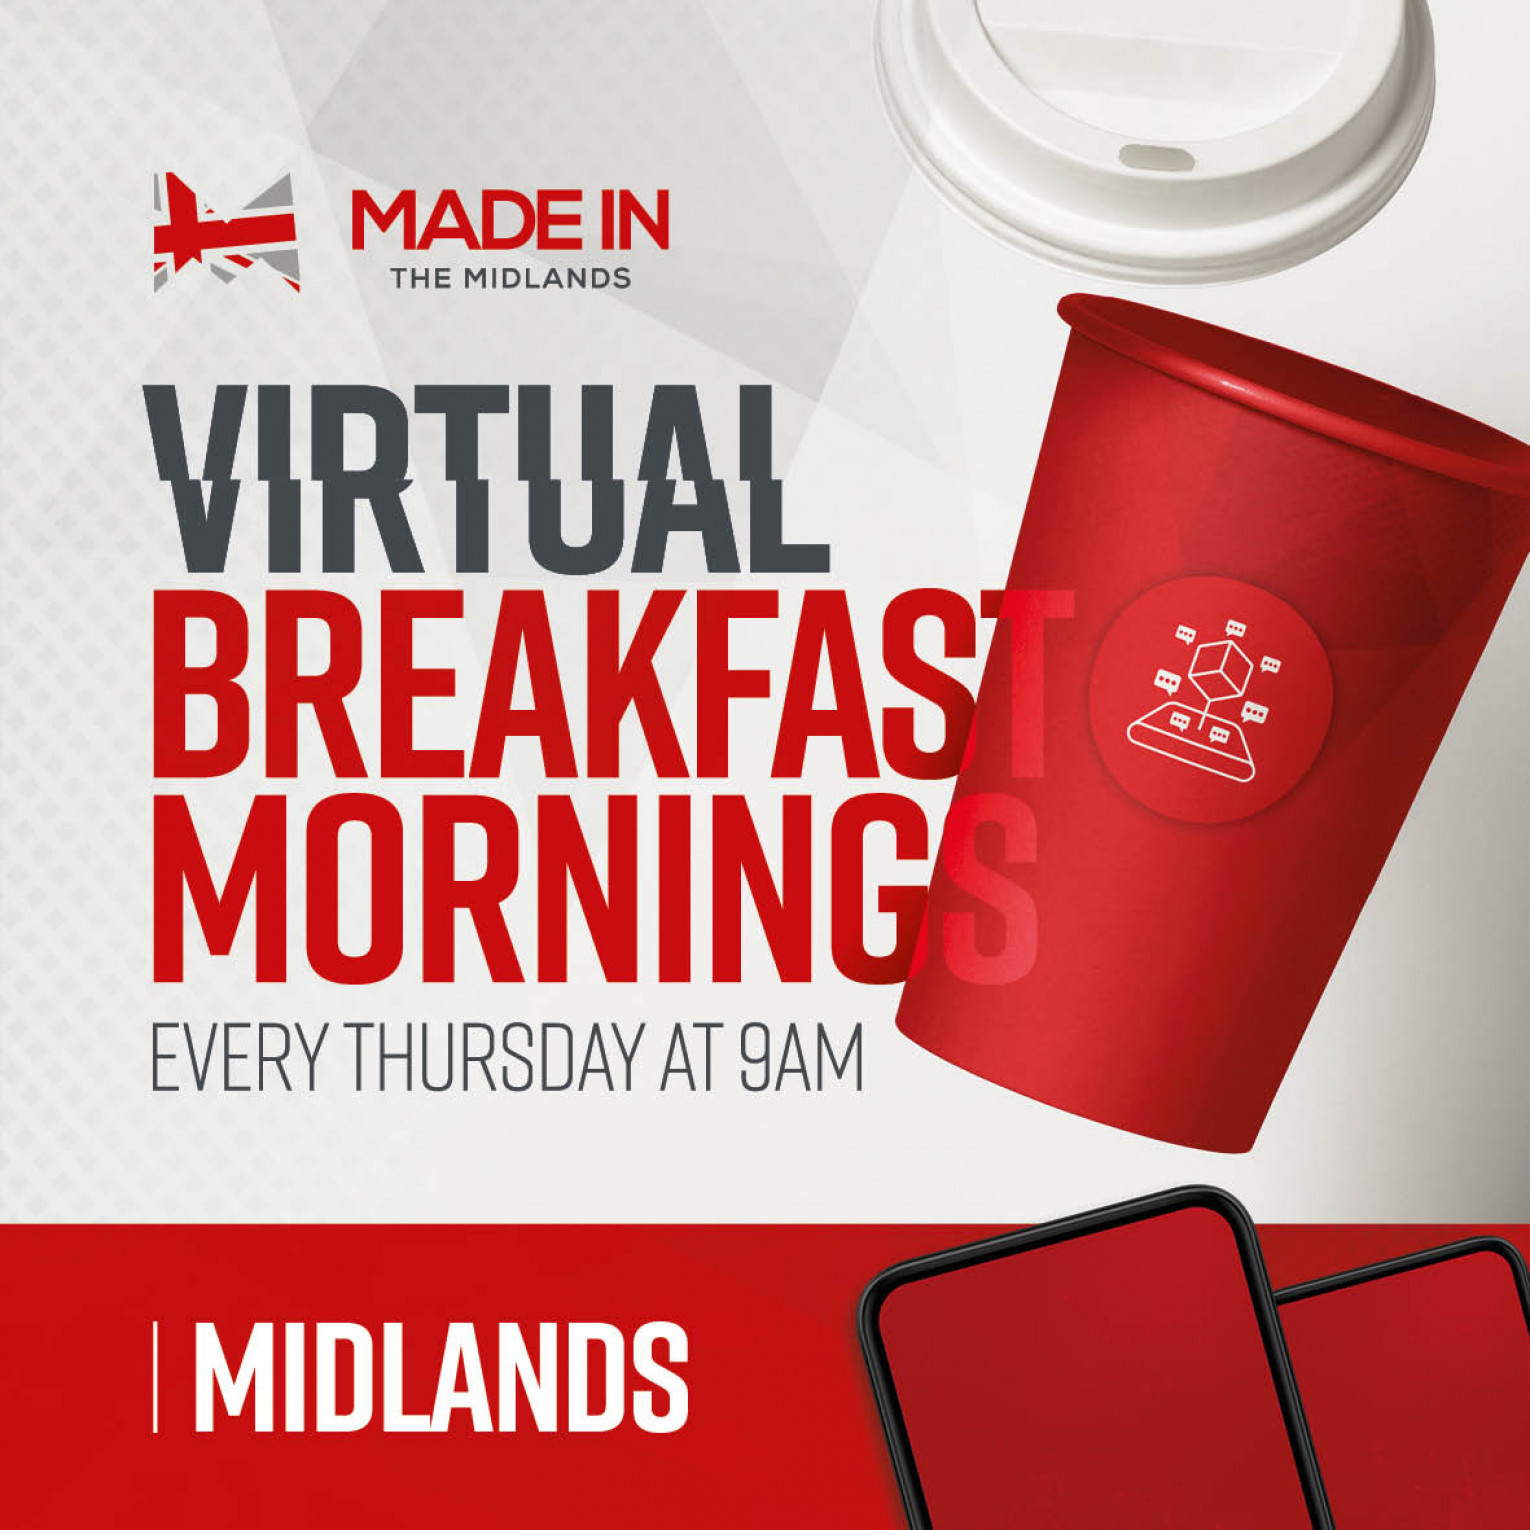 Made in the Midlands Virtual Breakfast Morning with Acoustafoam